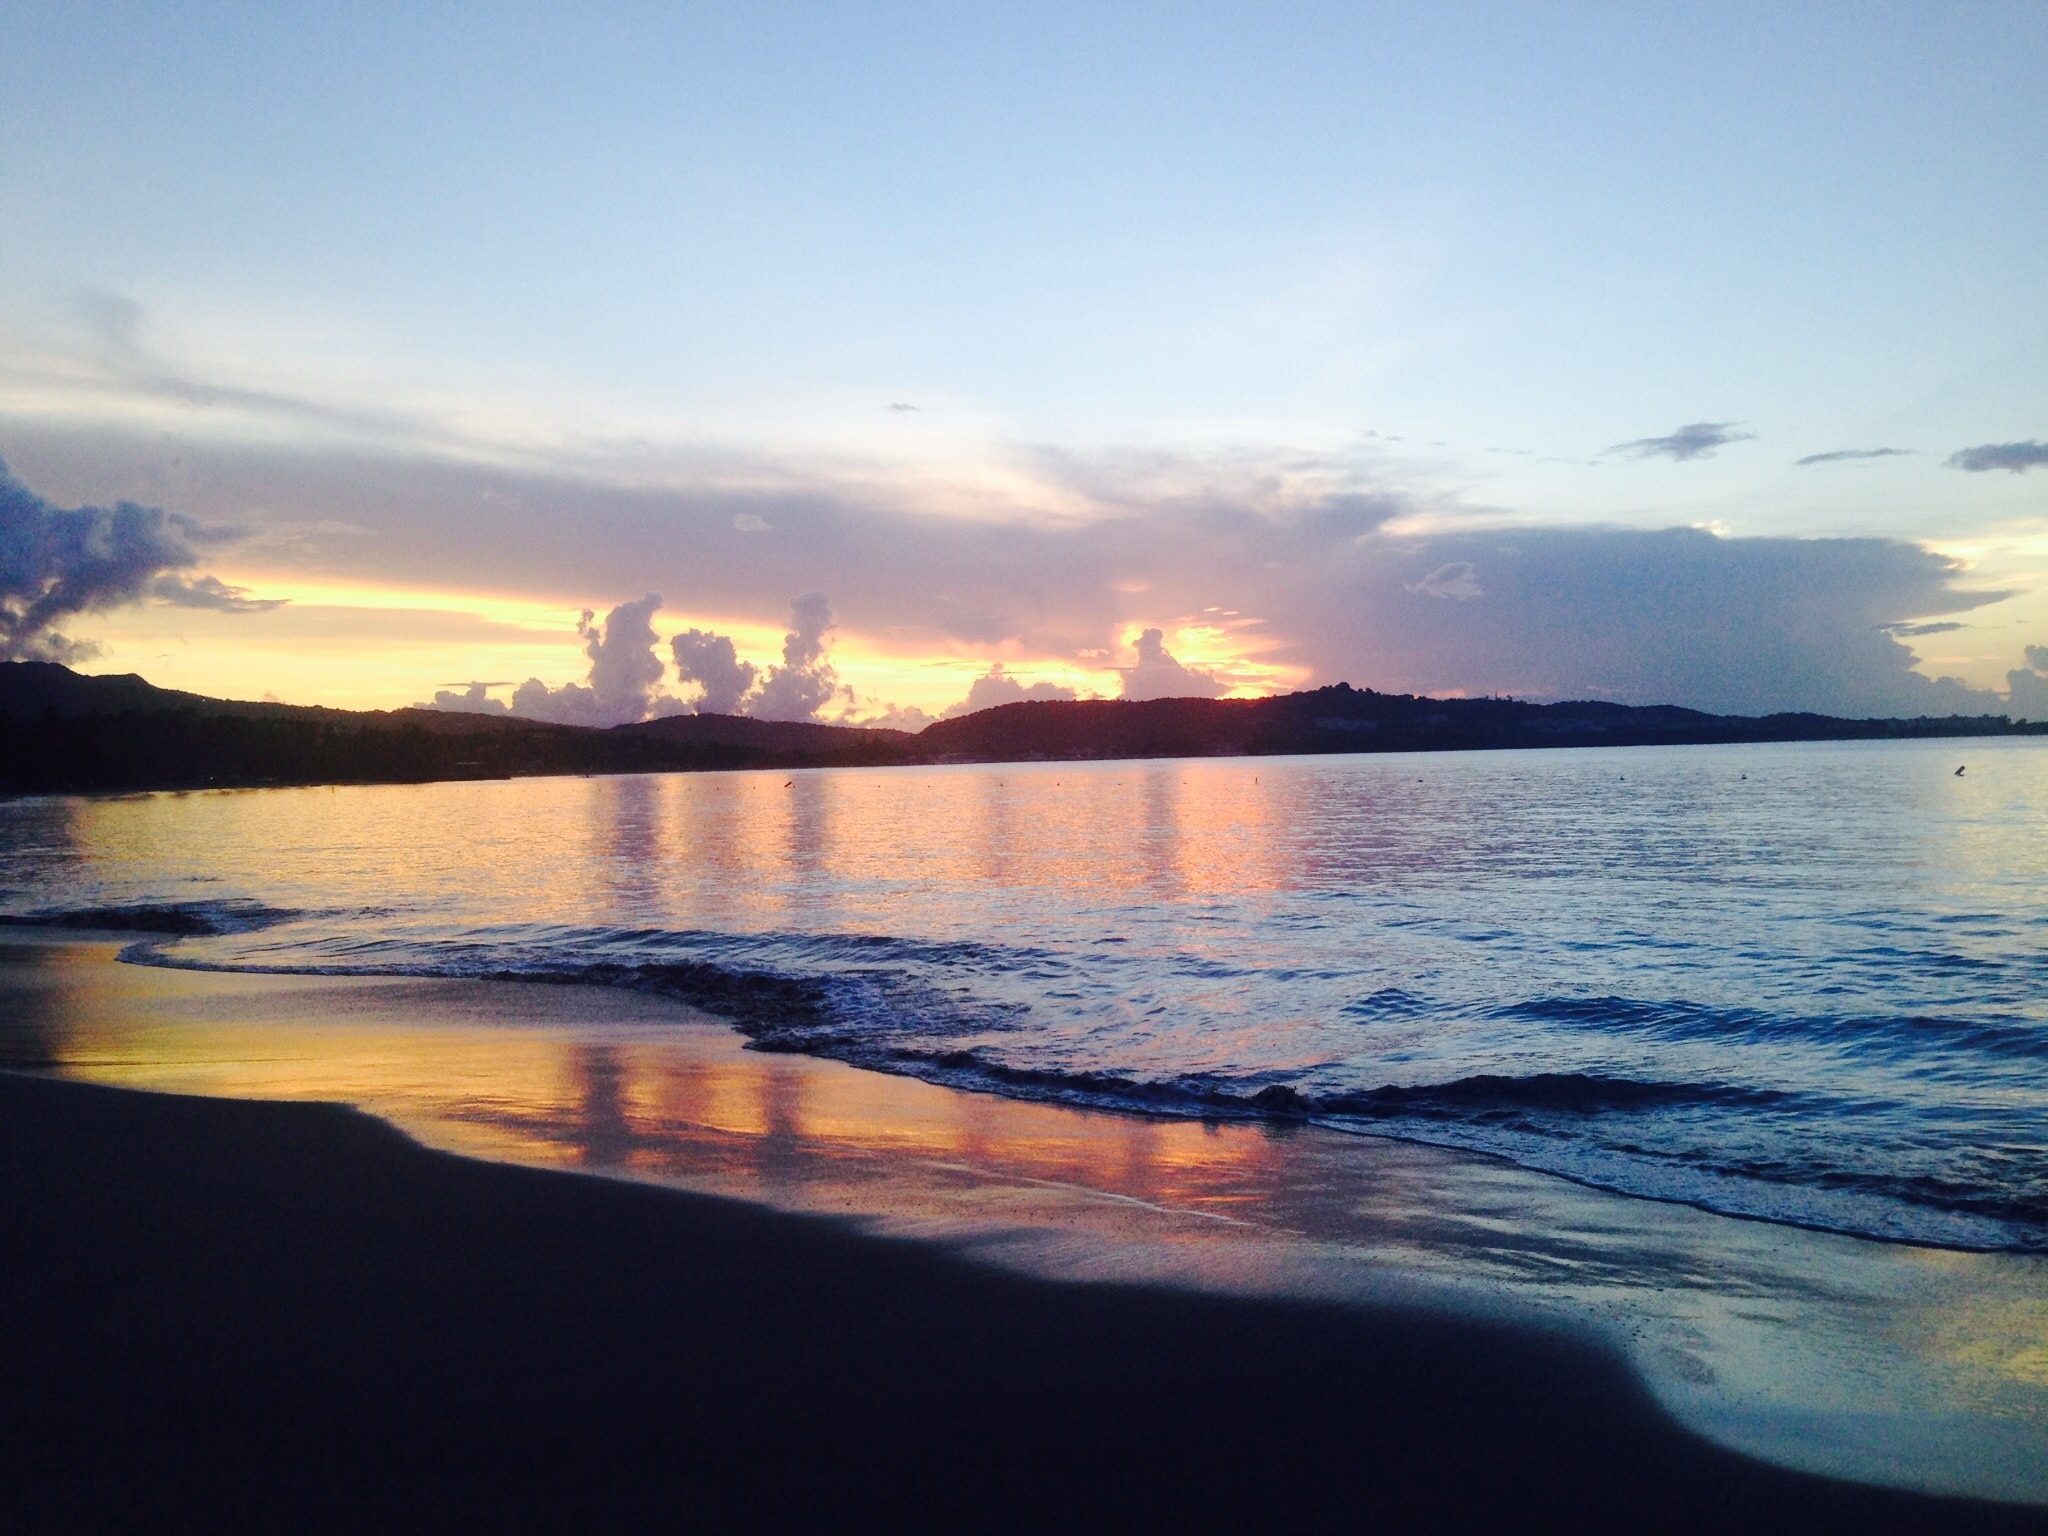 Sunset at the beach in Puerto Rico